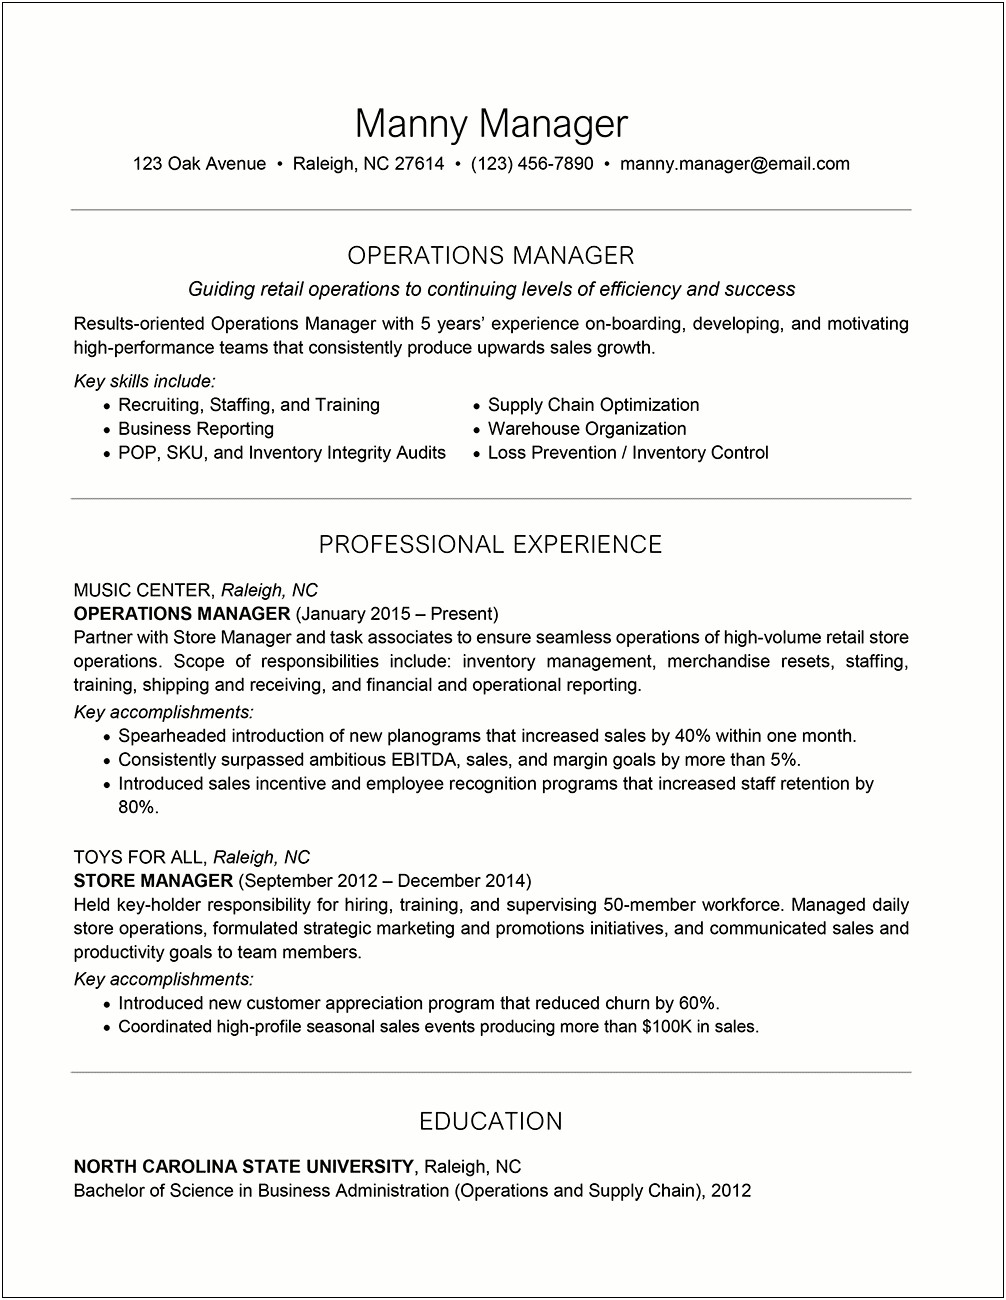 Professional Profile Resume Store Manager